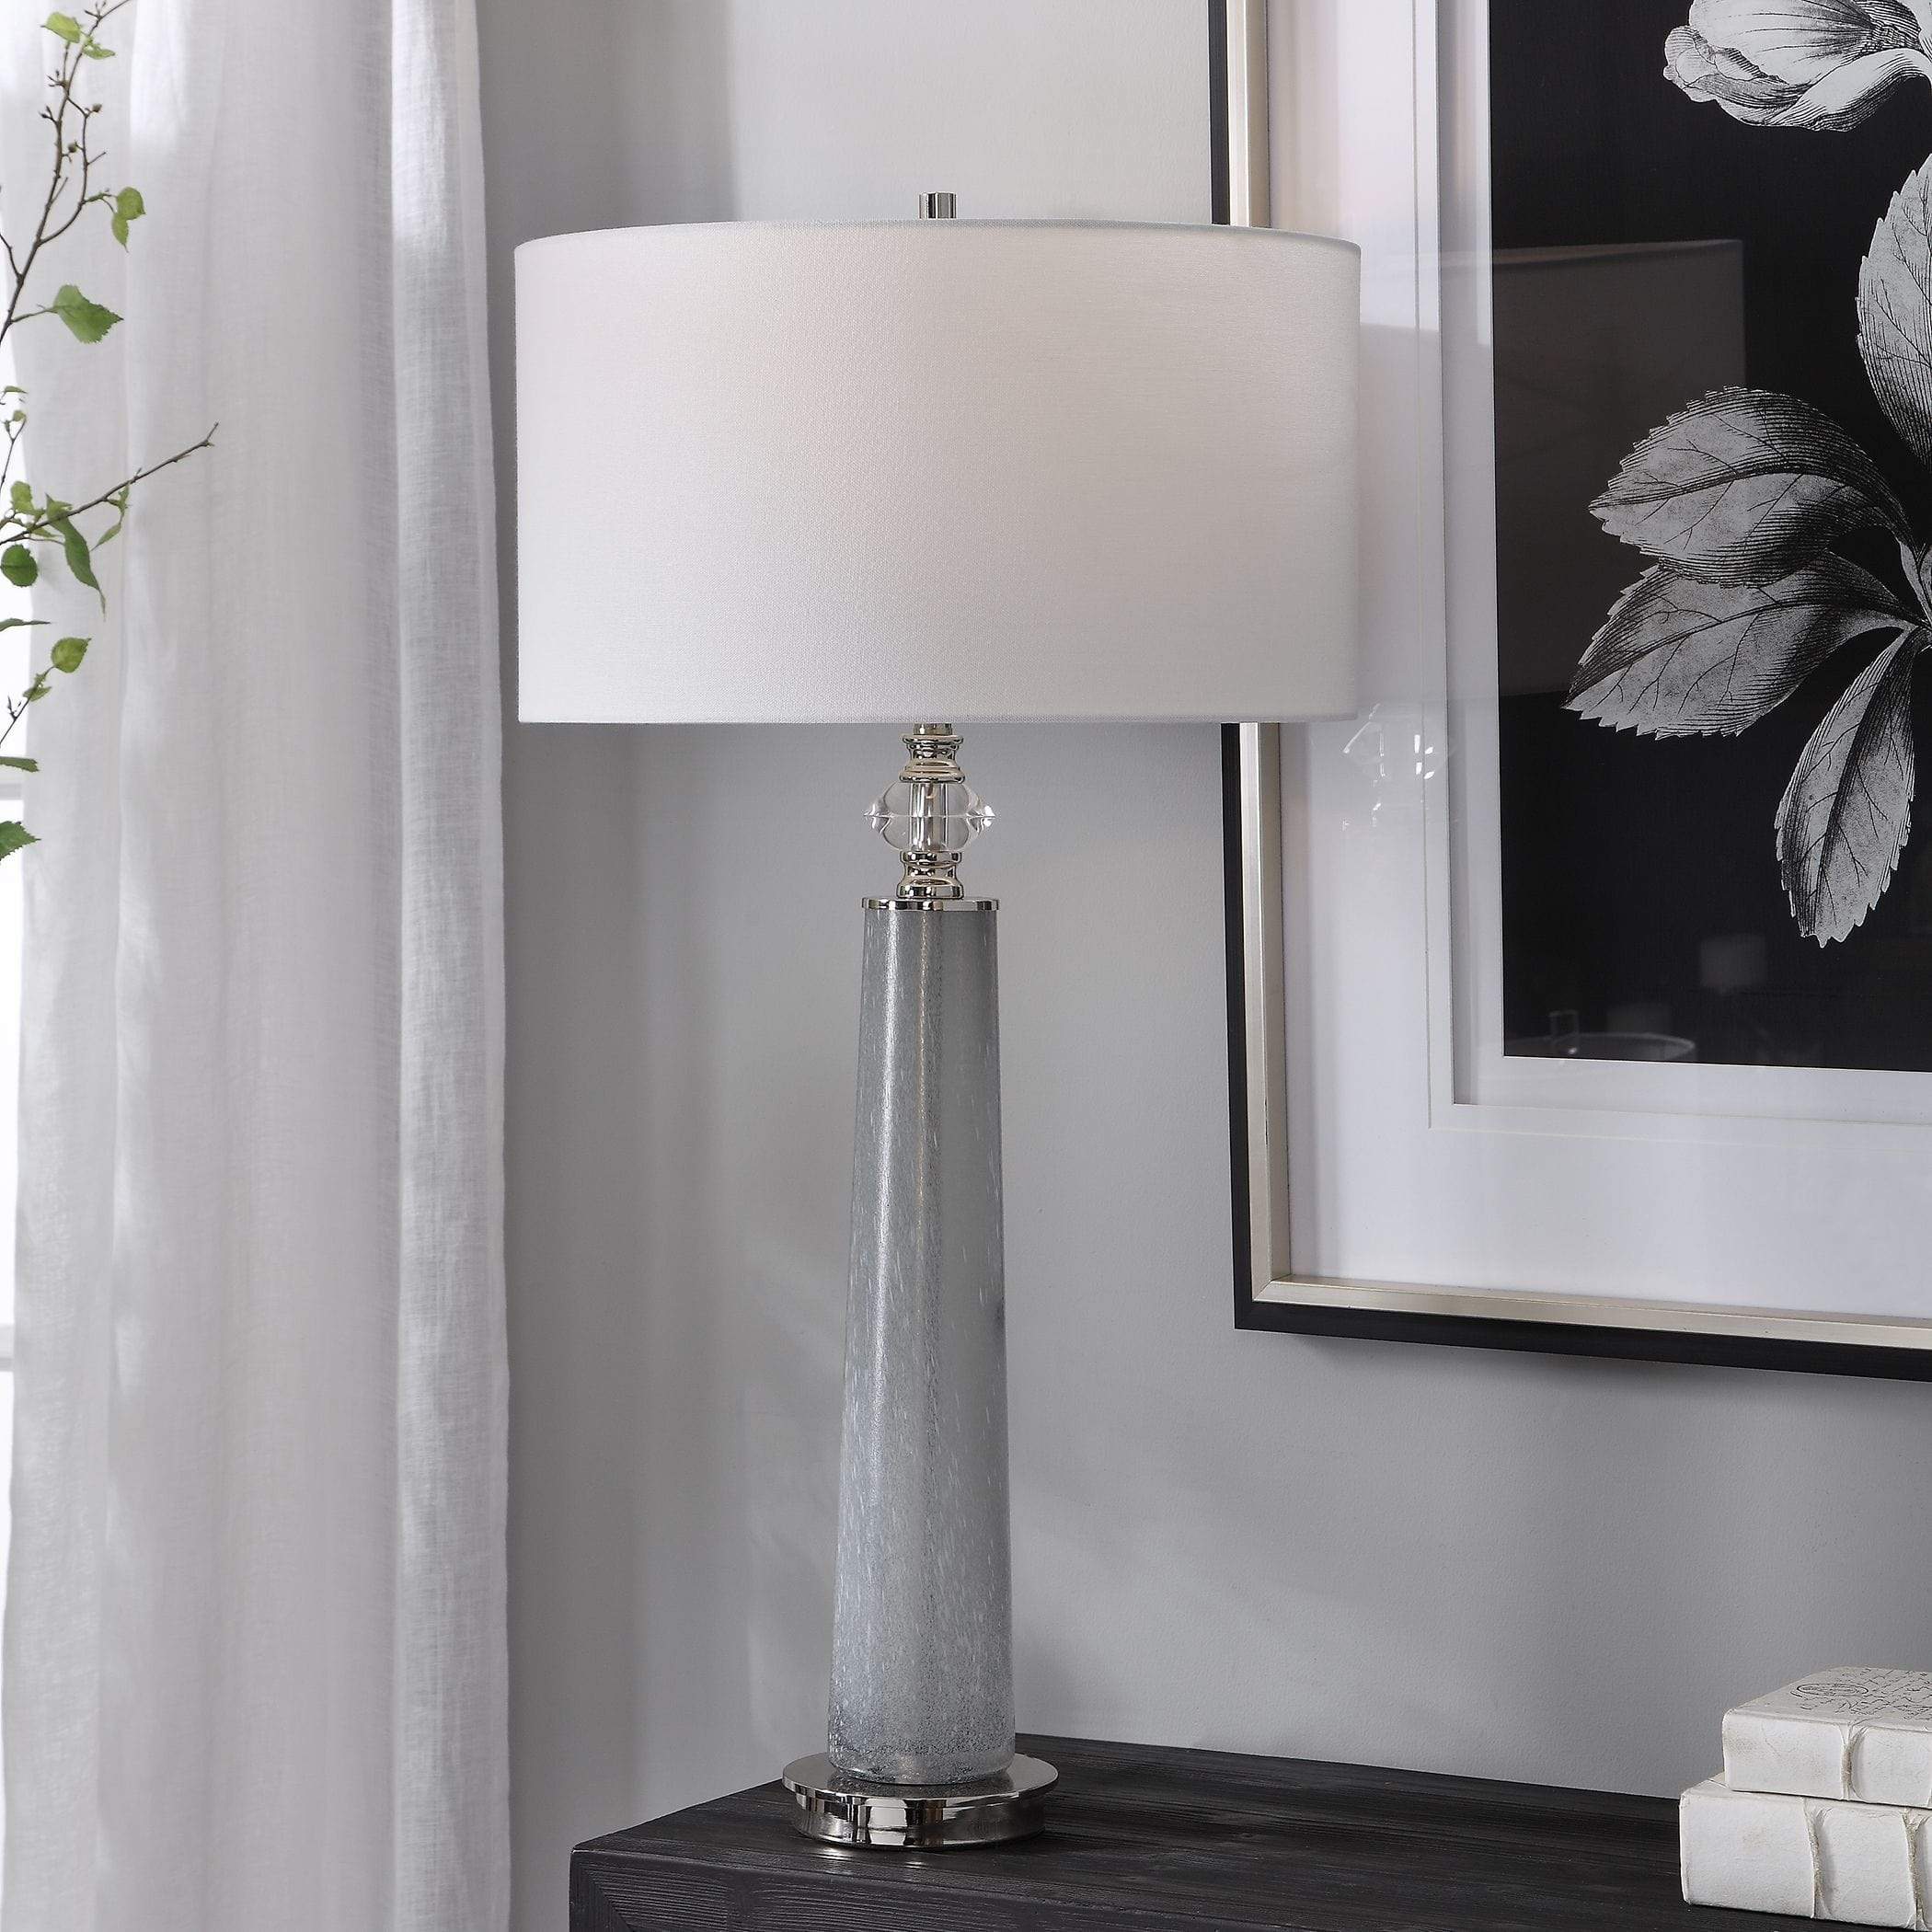 Graytone Frosted Glass Table Lamp Uttermost